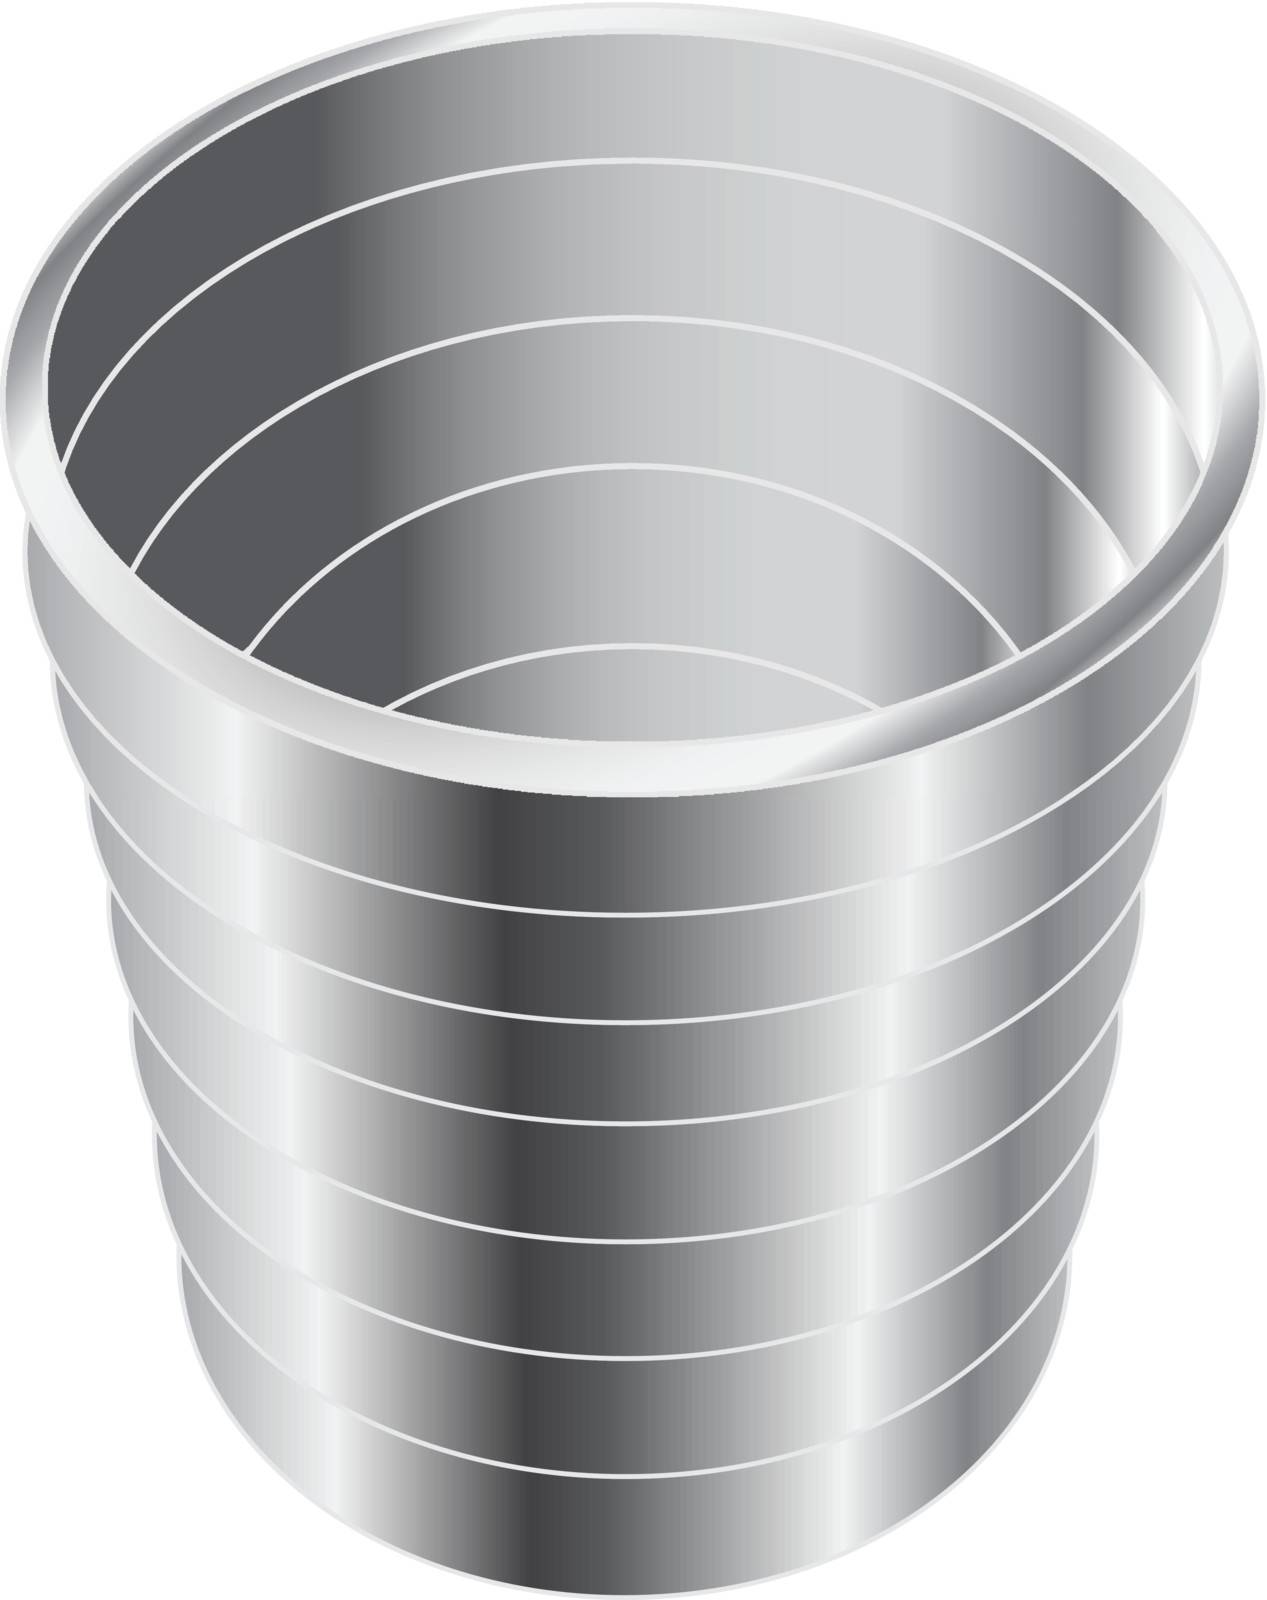 The steel cup for wine by VIPDesignUSA